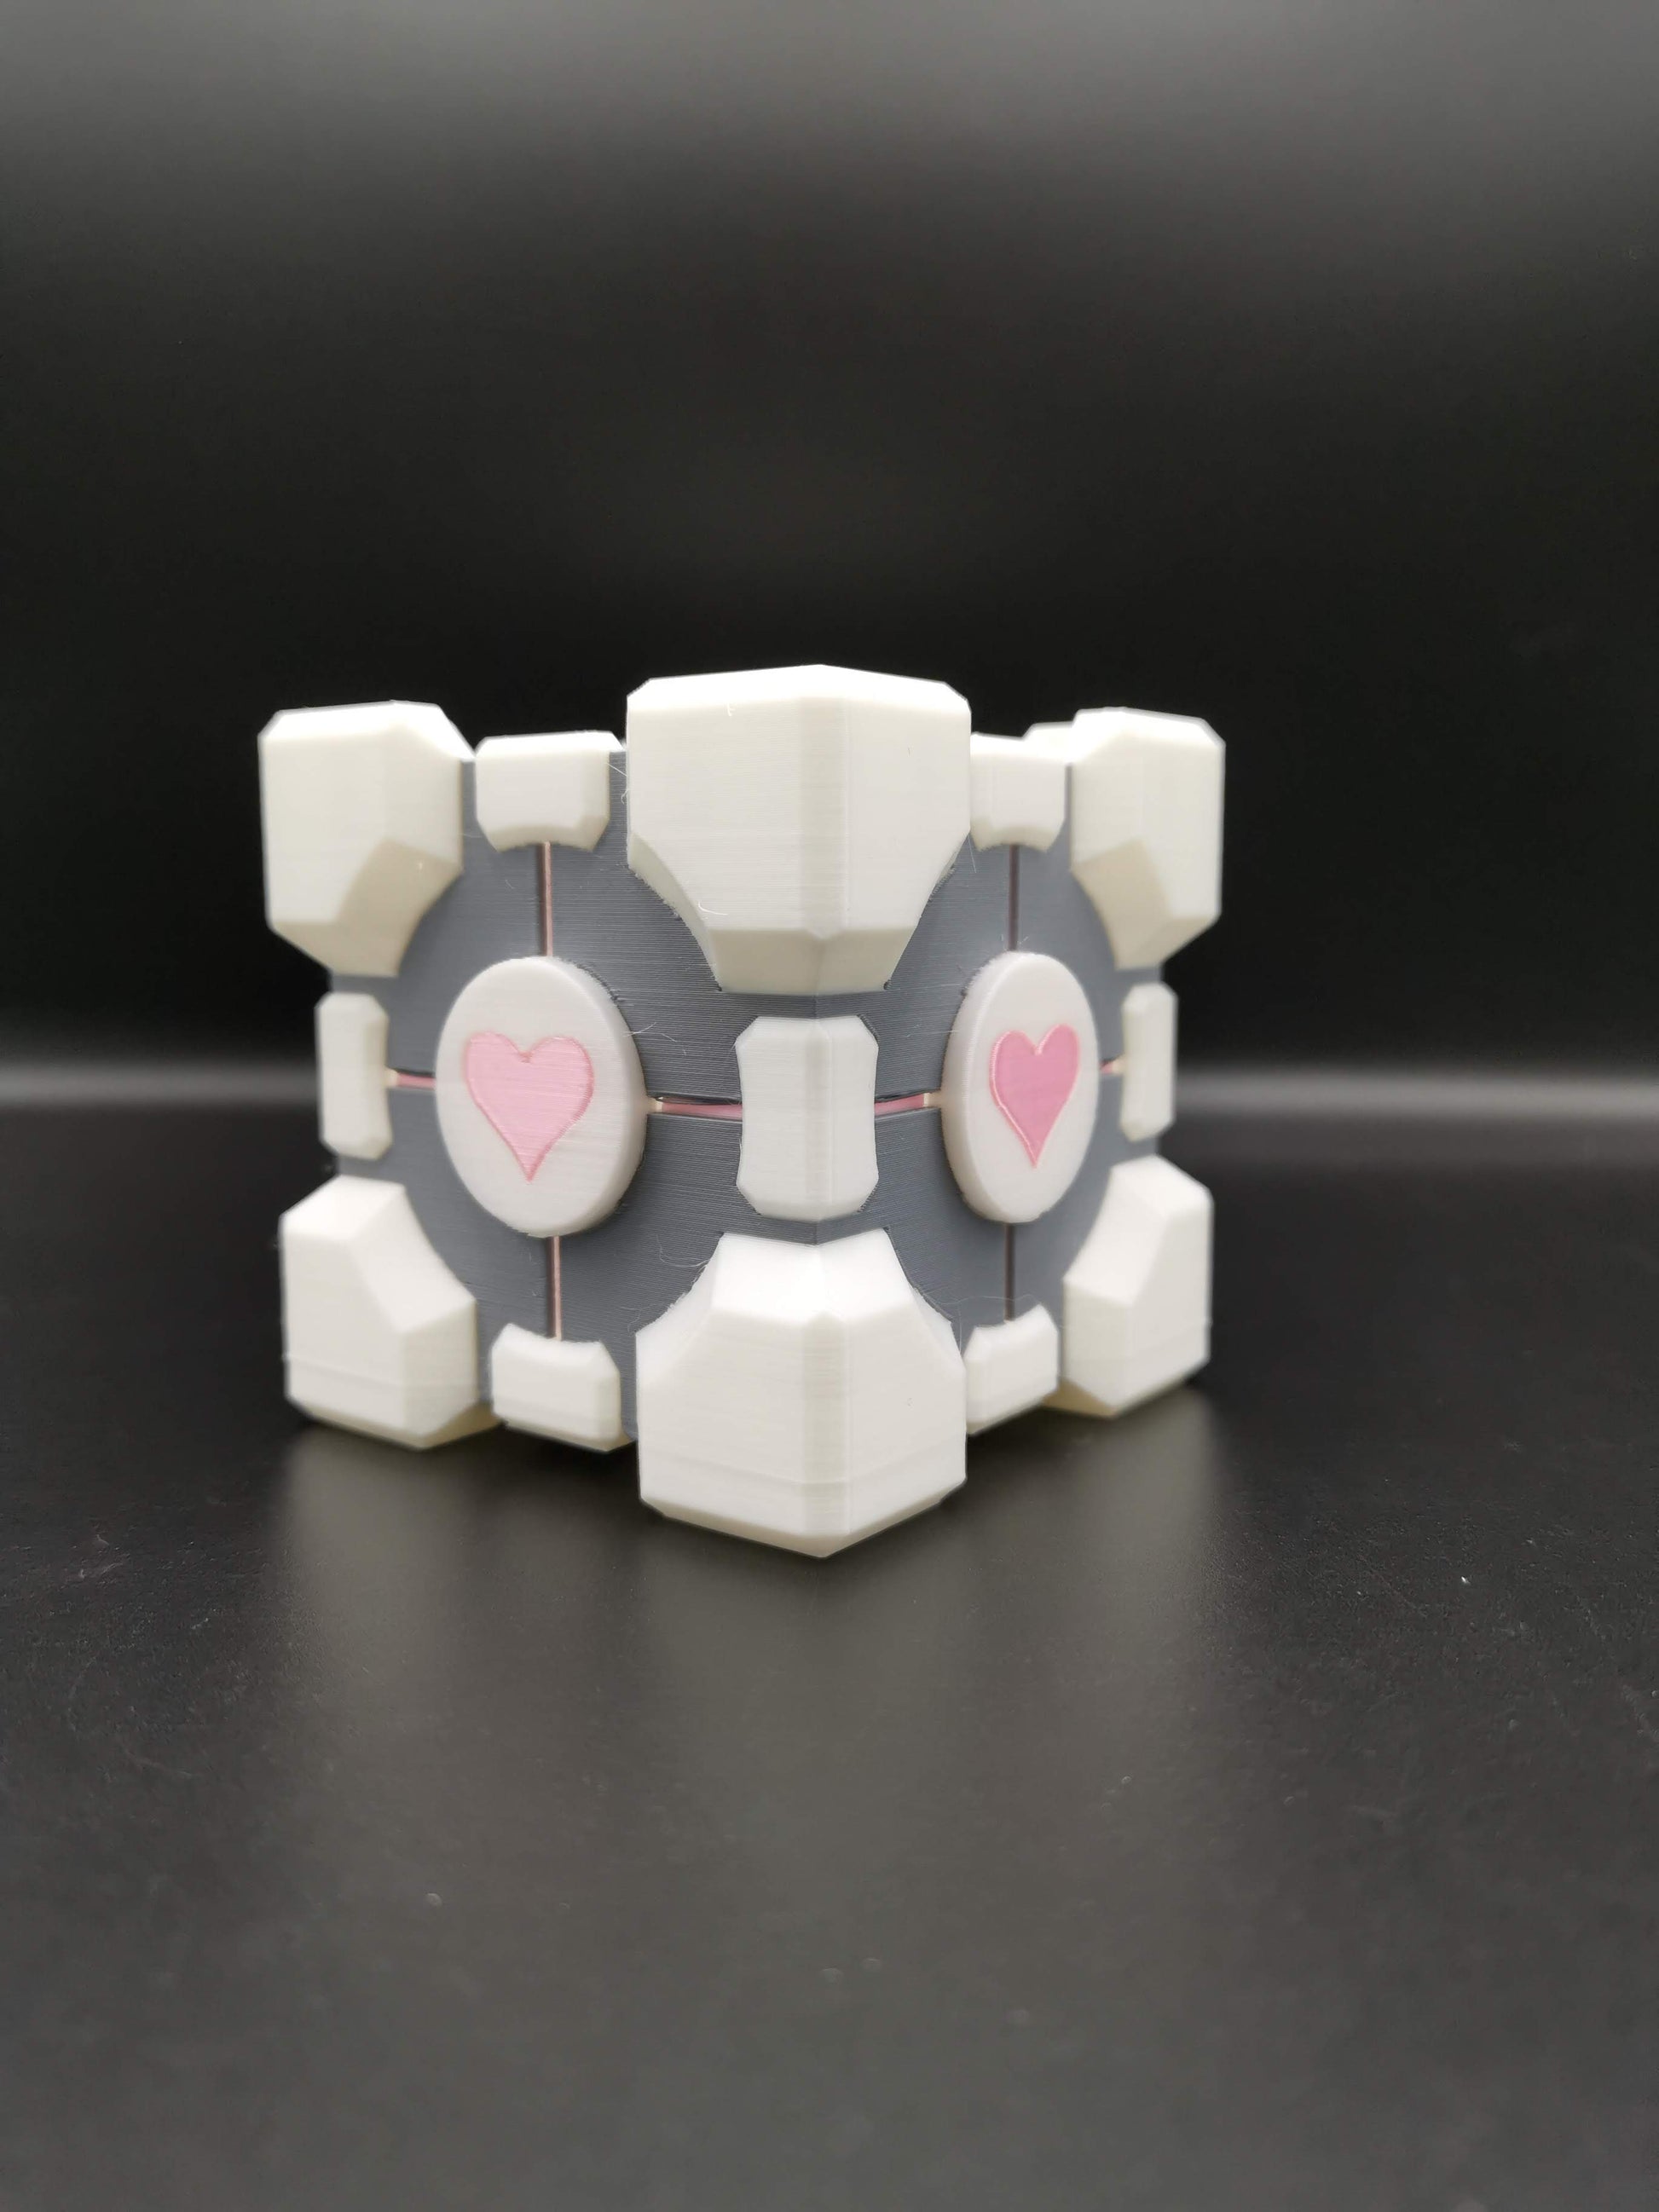 Companion Cube Portal planter close up from front side angle